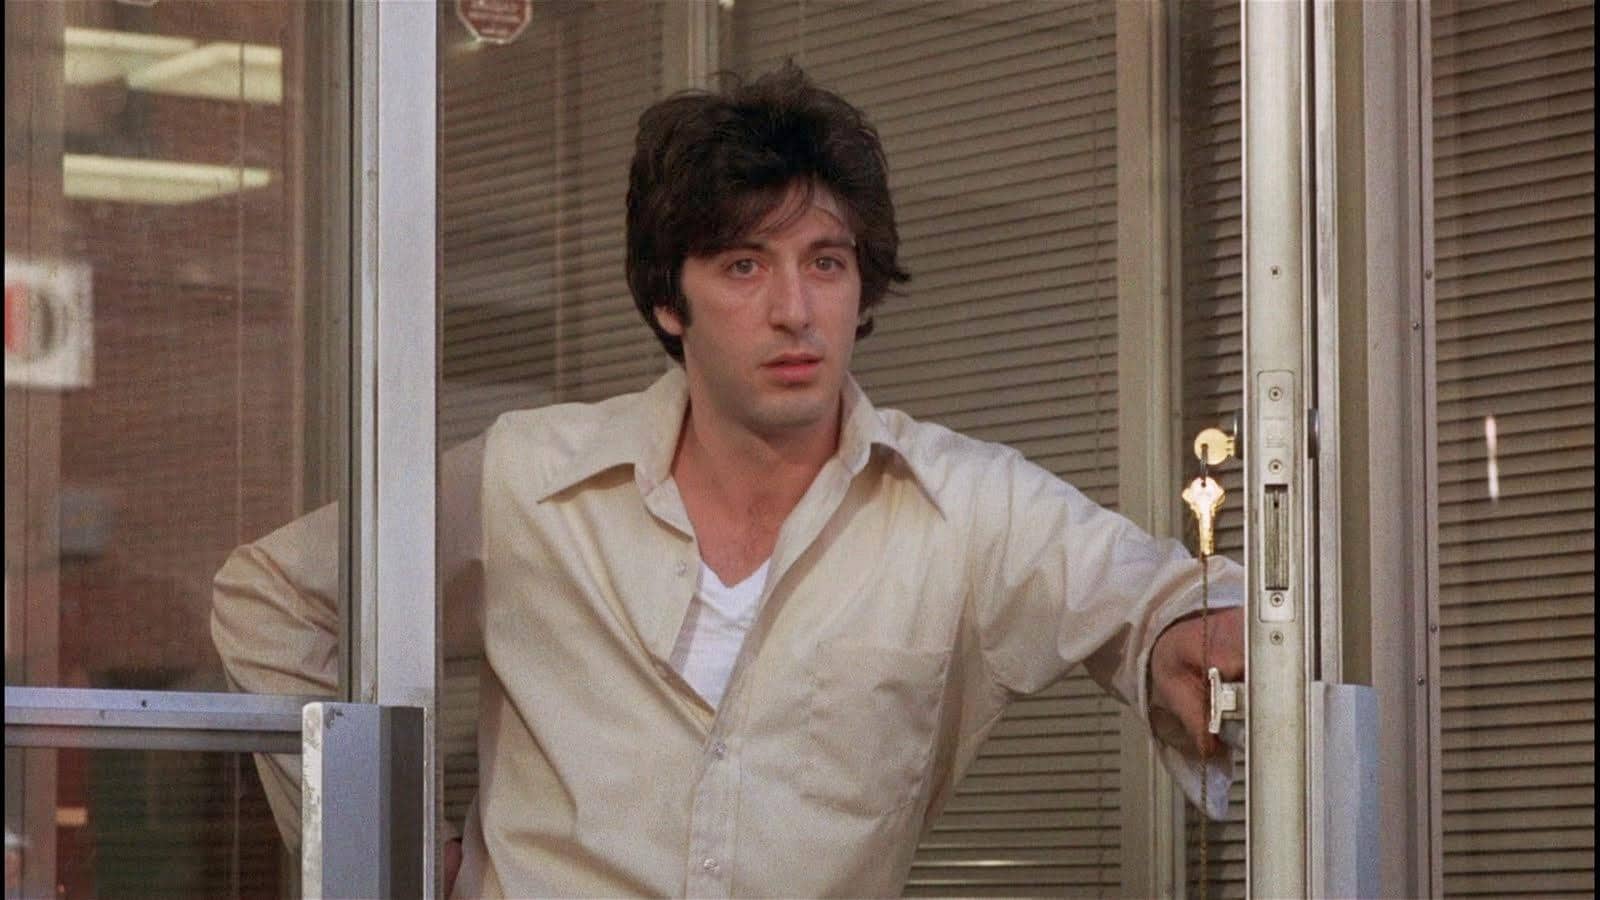 Dog Day Afternoon | Al Pacino in Dog Day Afternoon (1975)